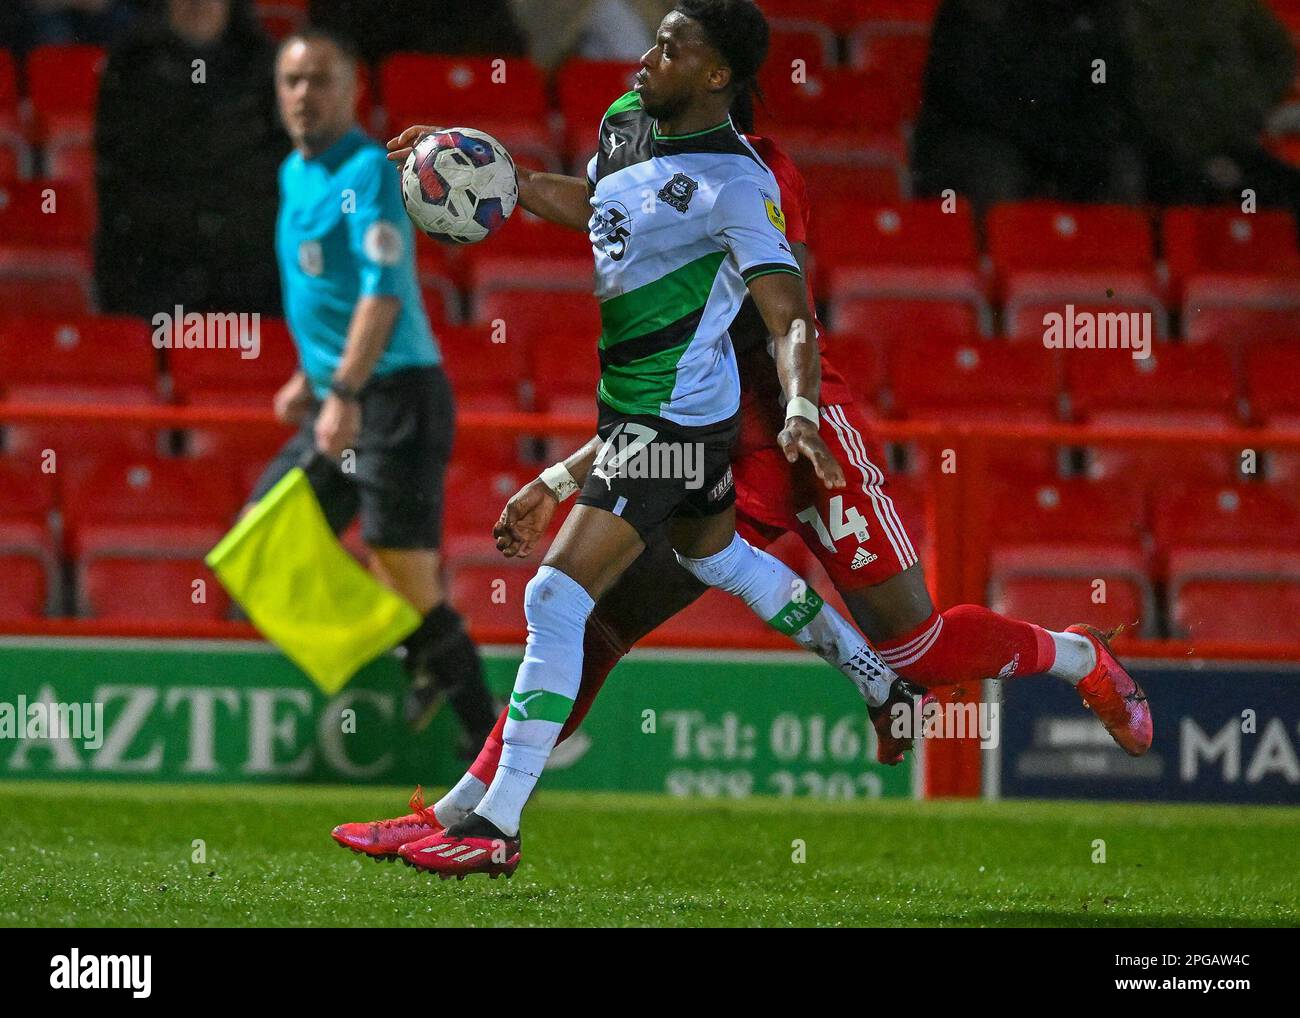 Bali Mumba #17 of Plymouth Argyle   in action during the Sky Bet League 1 match Accrington Stanley vs Plymouth Argyle at Wham Stadium, Accrington, United Kingdom, 21st March 2023  (Photo by Stan Kasala/News Images) Stock Photo